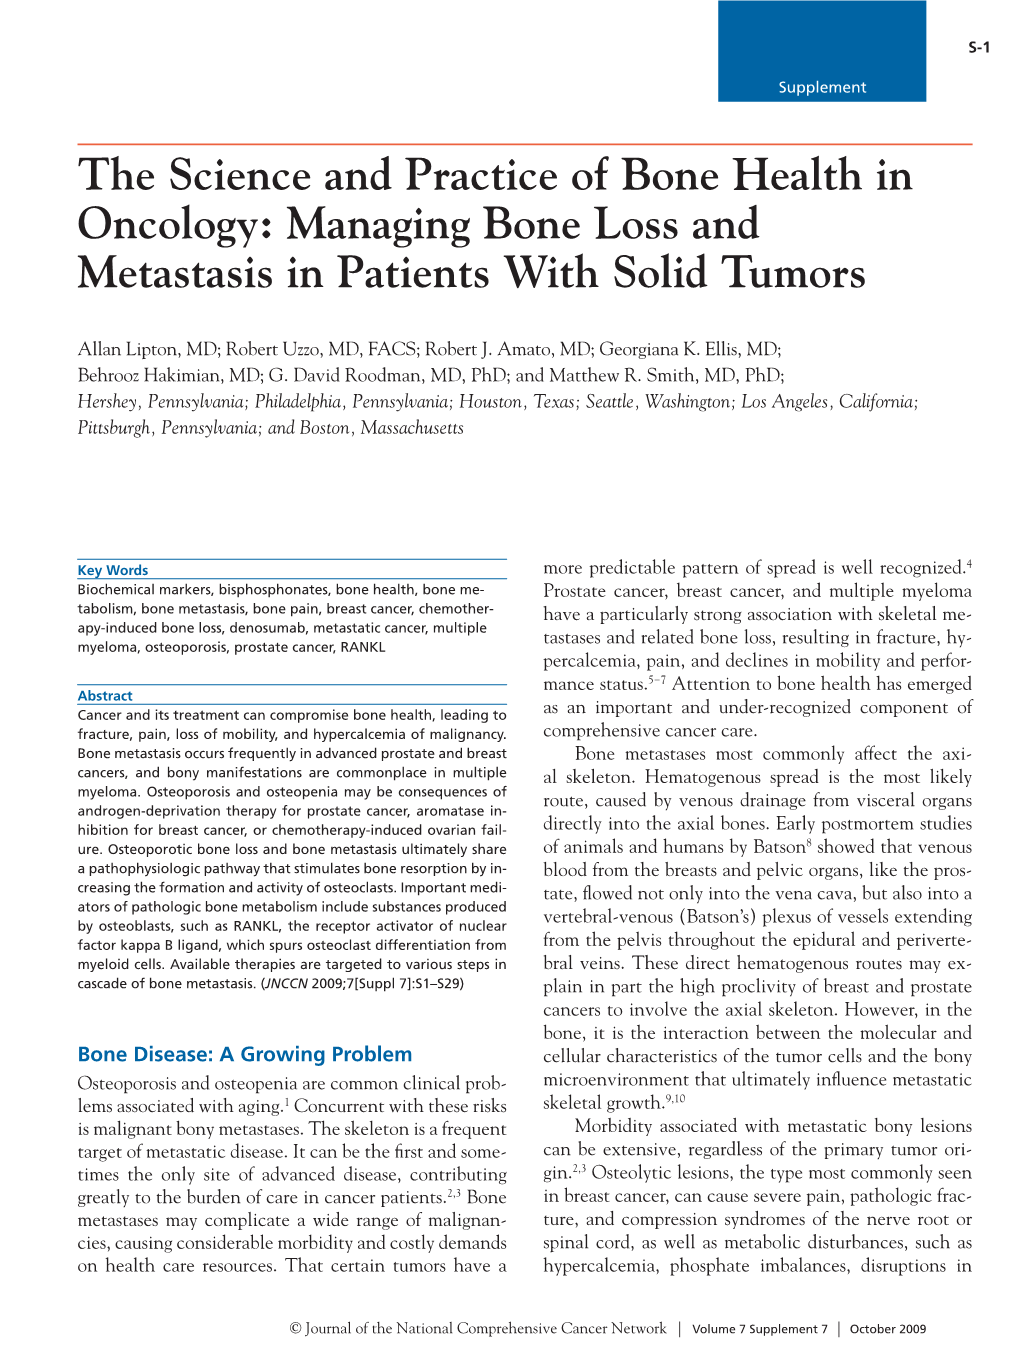 The Science and Practice of Bone Health in Oncology: Managing Bone Loss and Metastasis in Patients with Solid Tumors